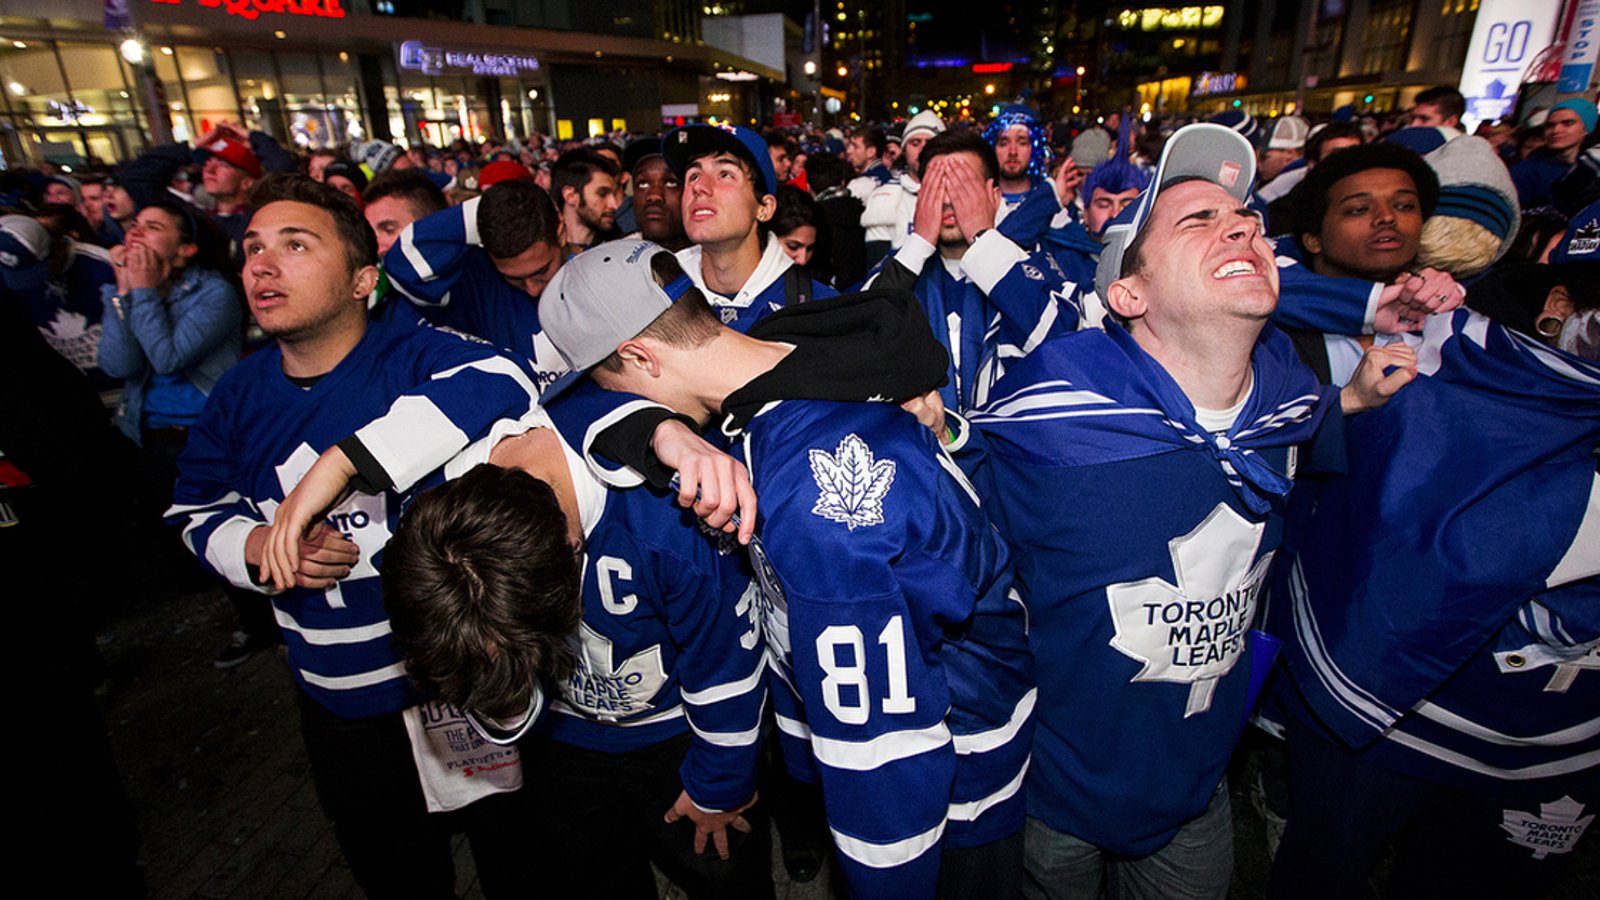 The Leafs are no longer the most valuable team in Canada